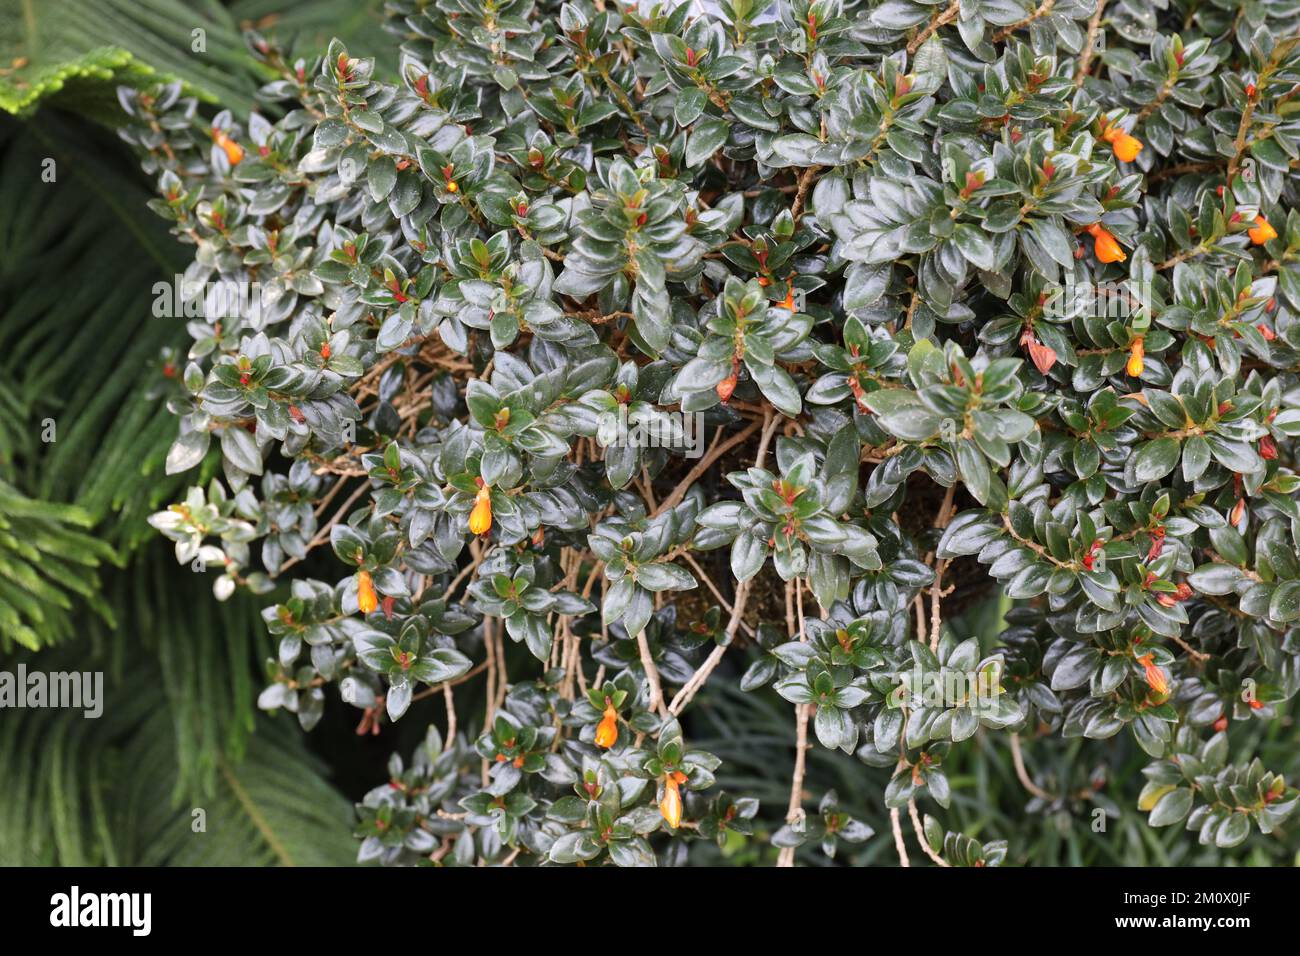 A hanging basket filled with a Goldfish Plant, Columnea microcalyx, with orange flowerbuds with a Norfolk Island Pine tree in the background Stock Photo